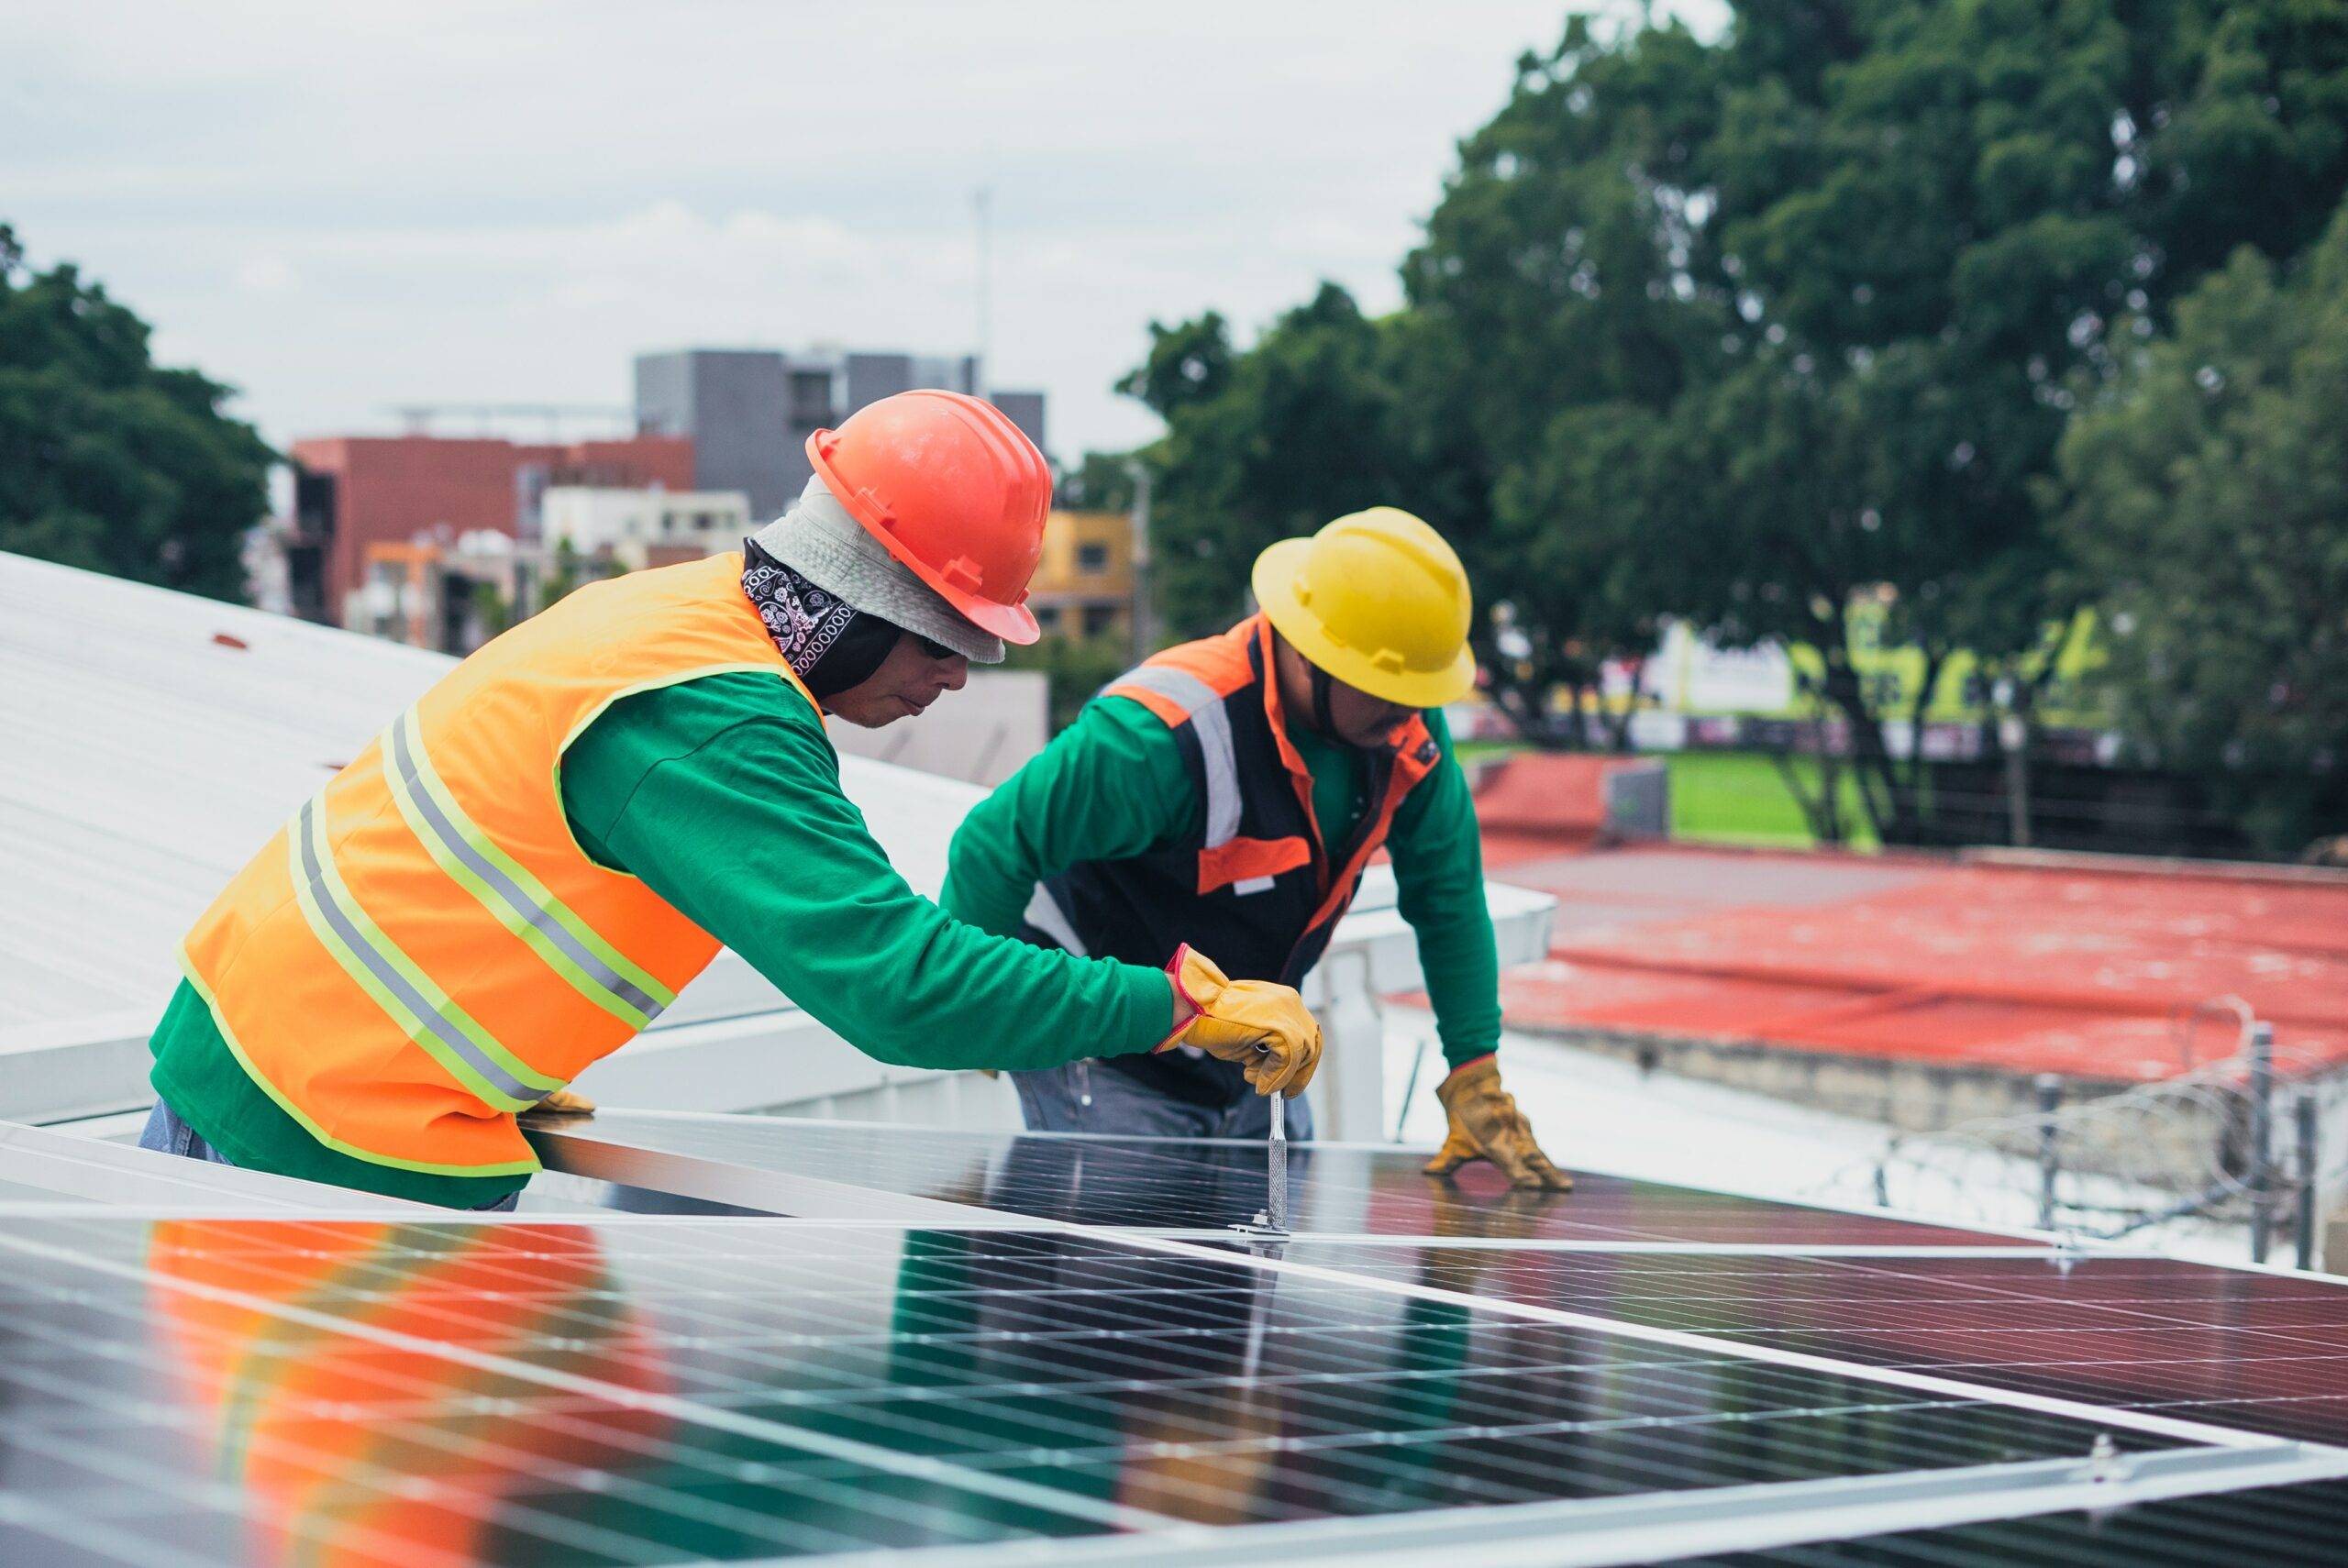 UK Feed-in Tariffs and Smart Export Guarantee to Encourage Rooftop Photovoltaic Installation